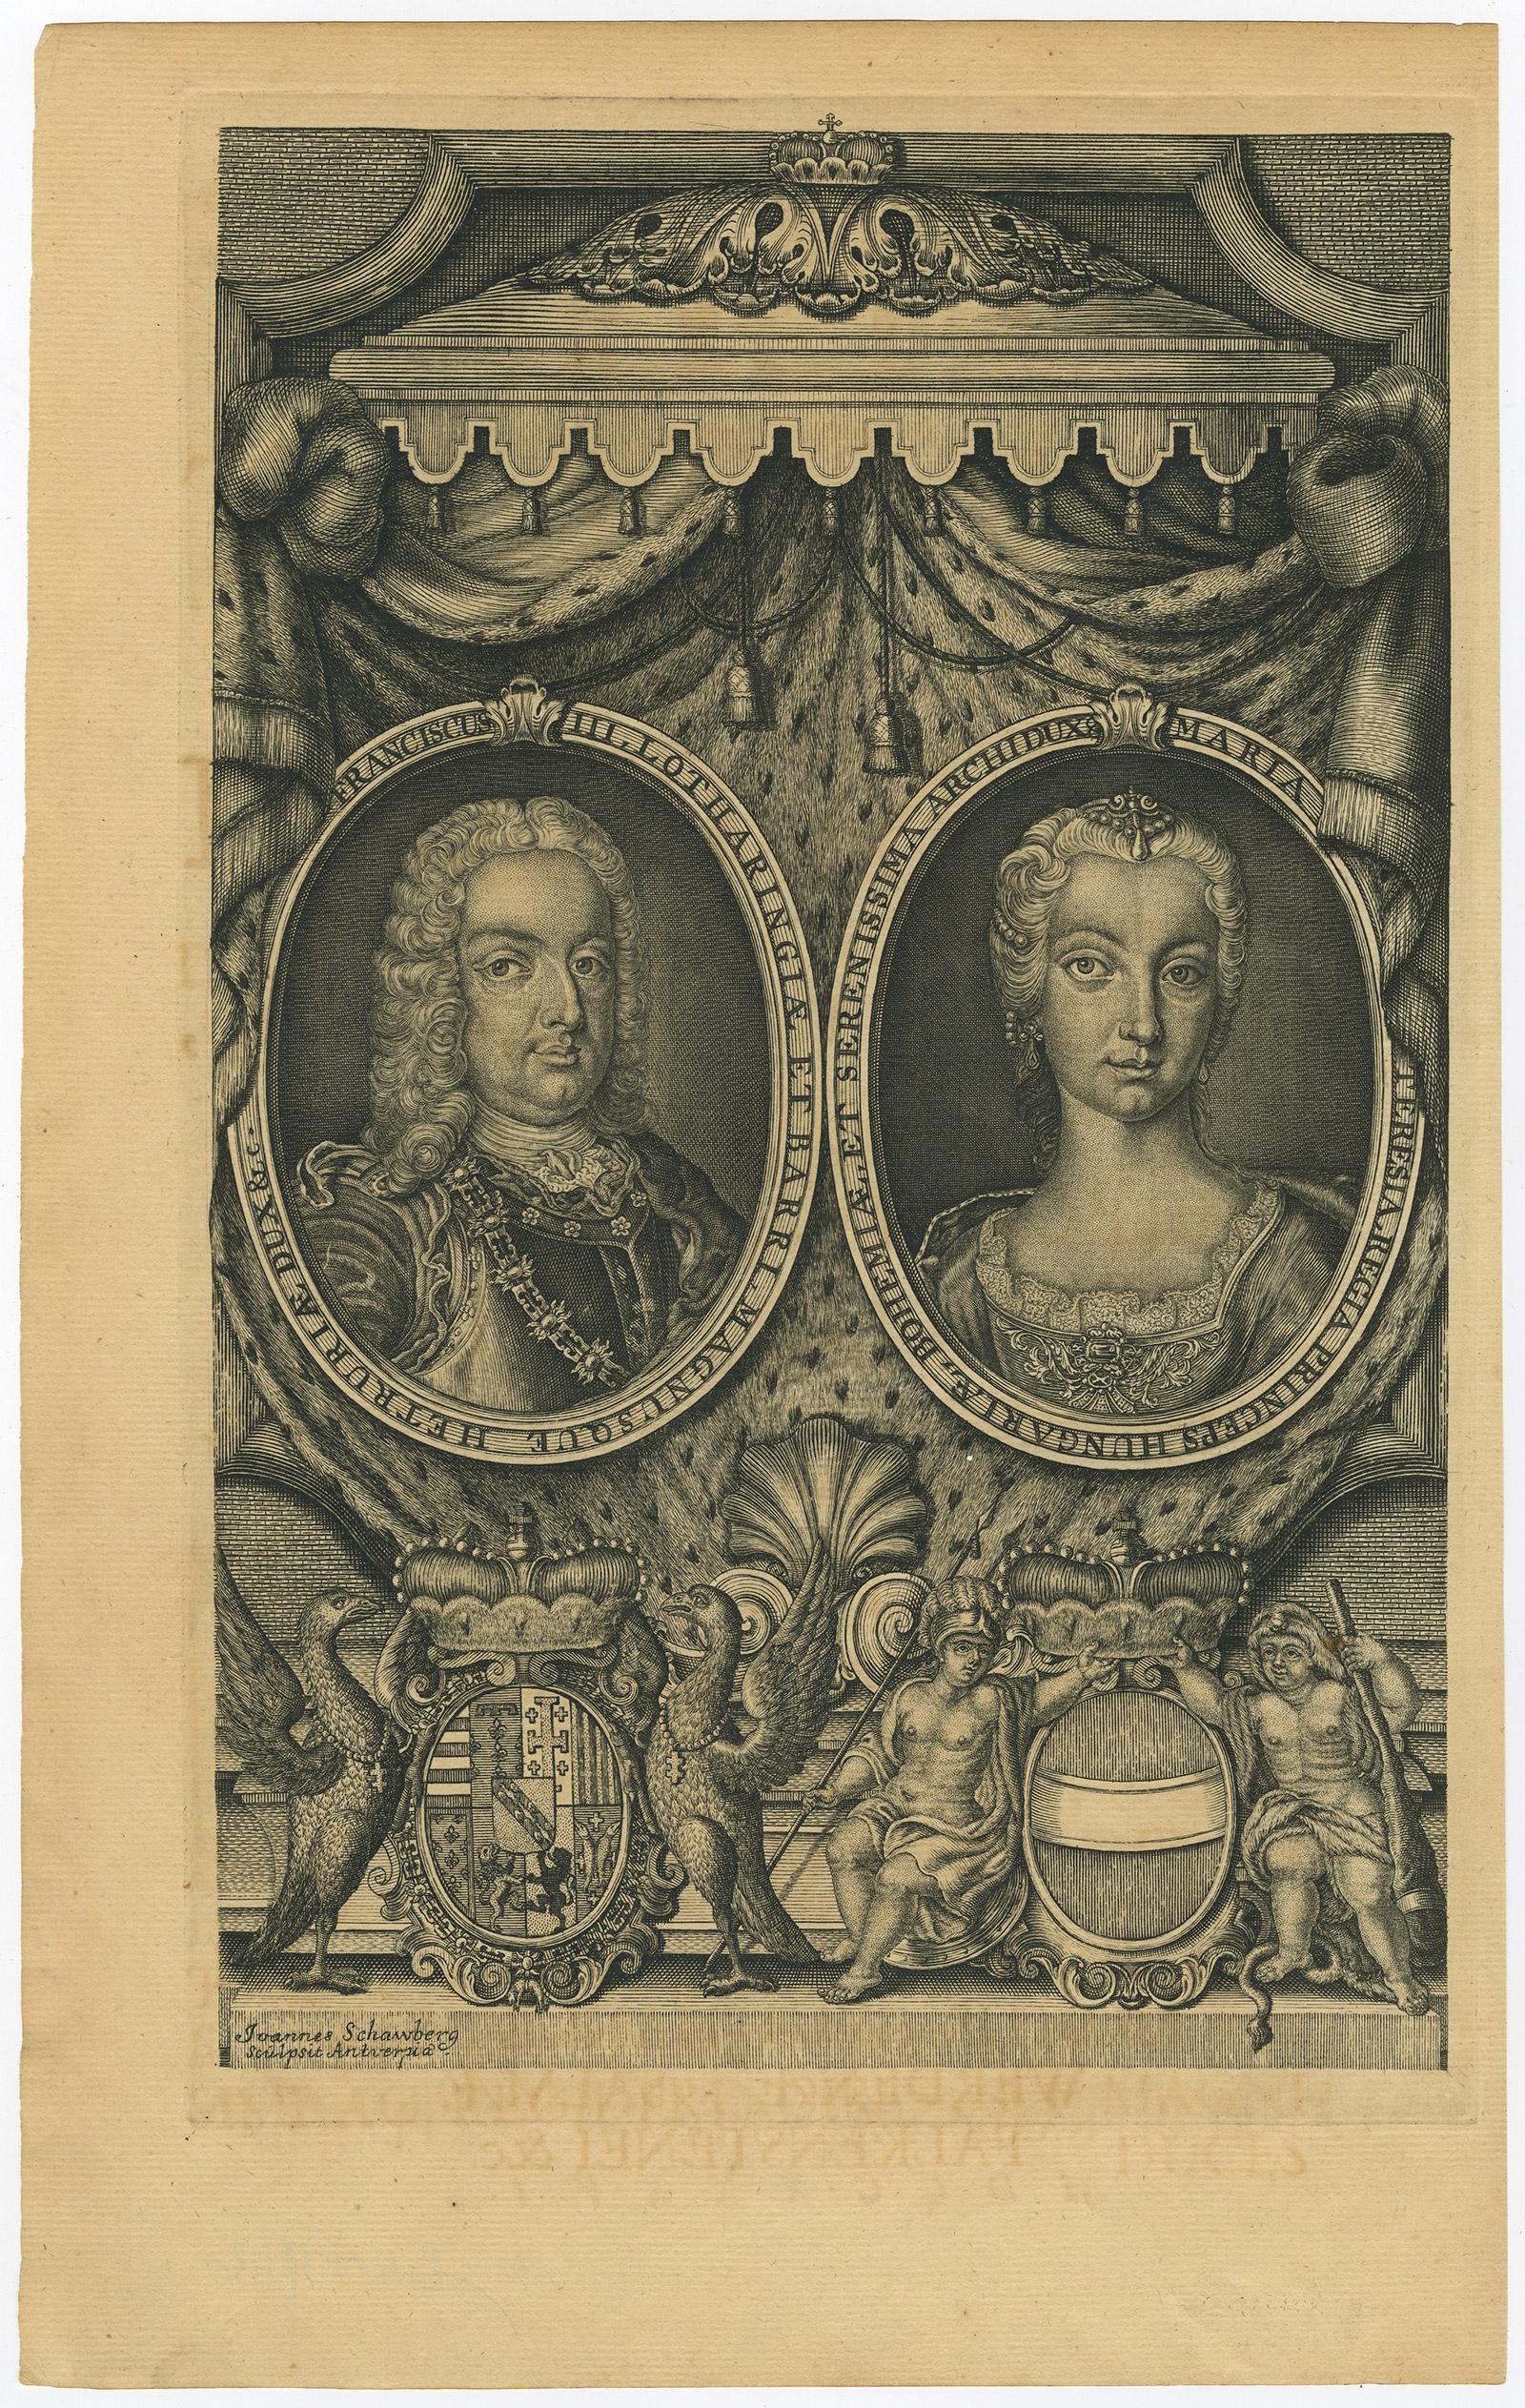 Antique print, titled: 'Franciscus III Lotharingiae - Maria Teresia (…)' 

This plate shows portraits of Francis I (1708 - 1765), Holy Roman Emperor and Grand Duke of Tuscany, though his wife effectively executed the real power of those positions.